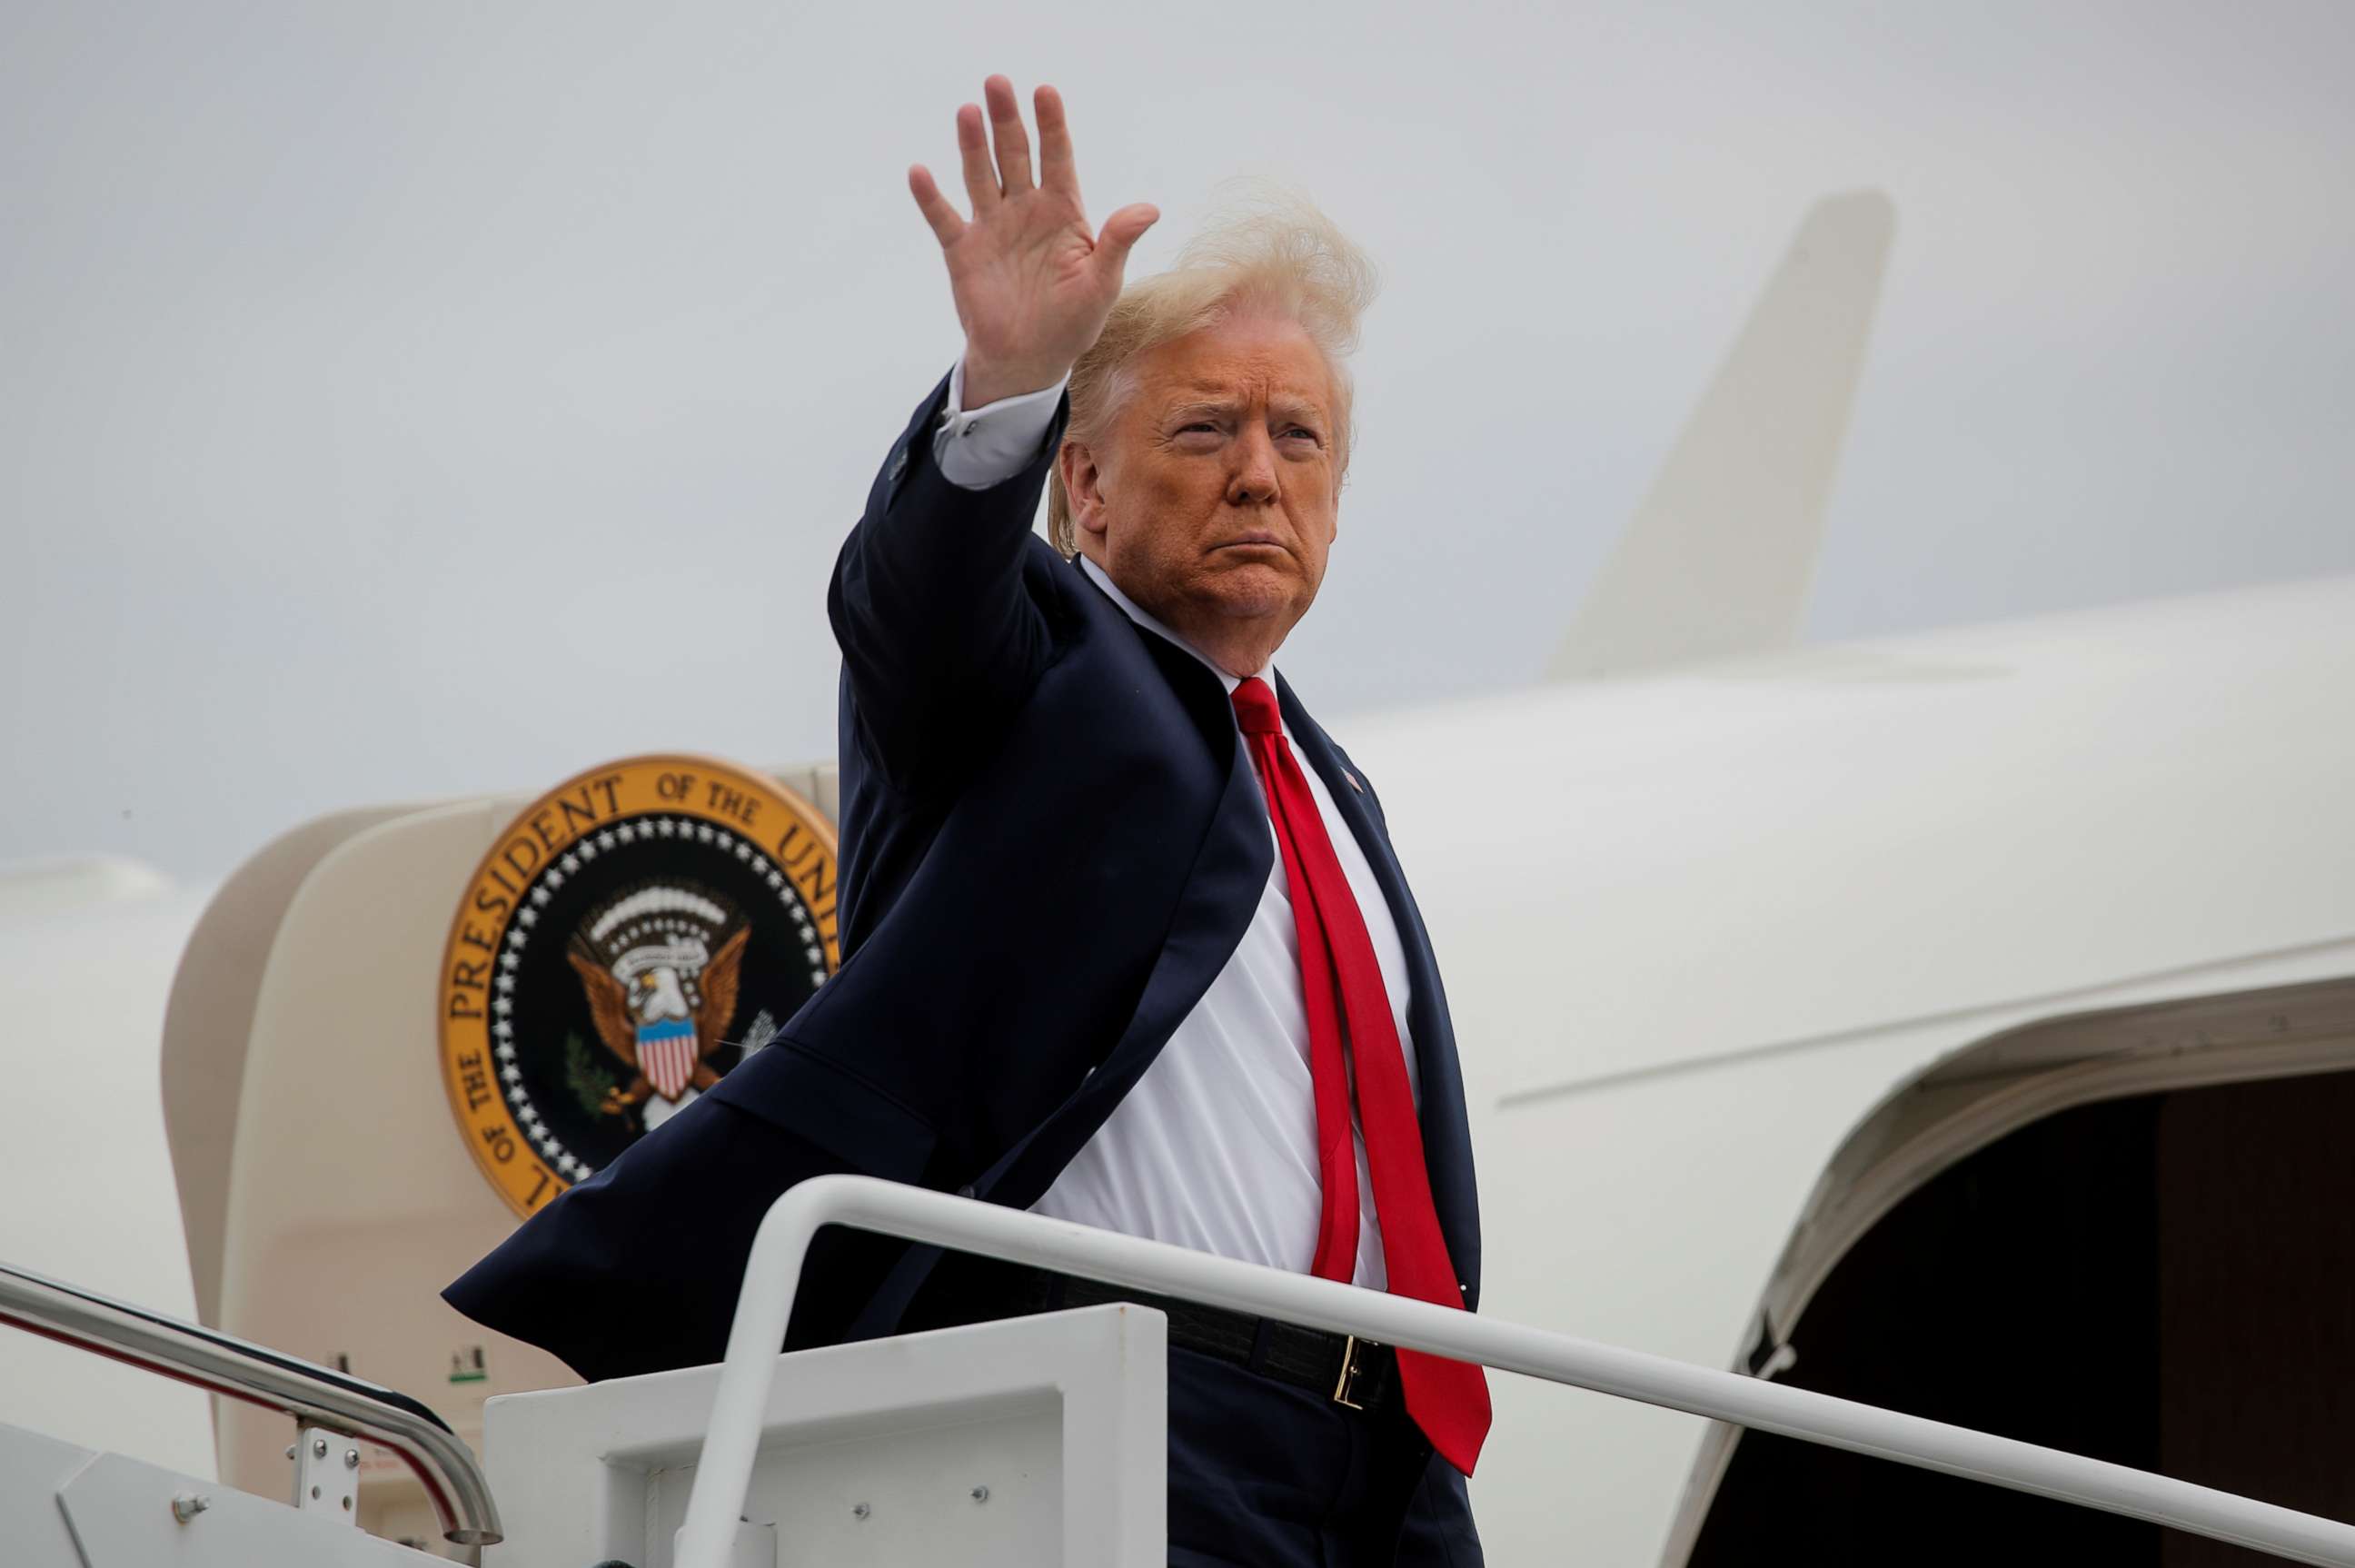 PHOTO: President Donald Trump boards Air Force One as he departs Washington on travel to Allentown, Penn., at Joint Base Andrews, Maryland, May 14, 2020.